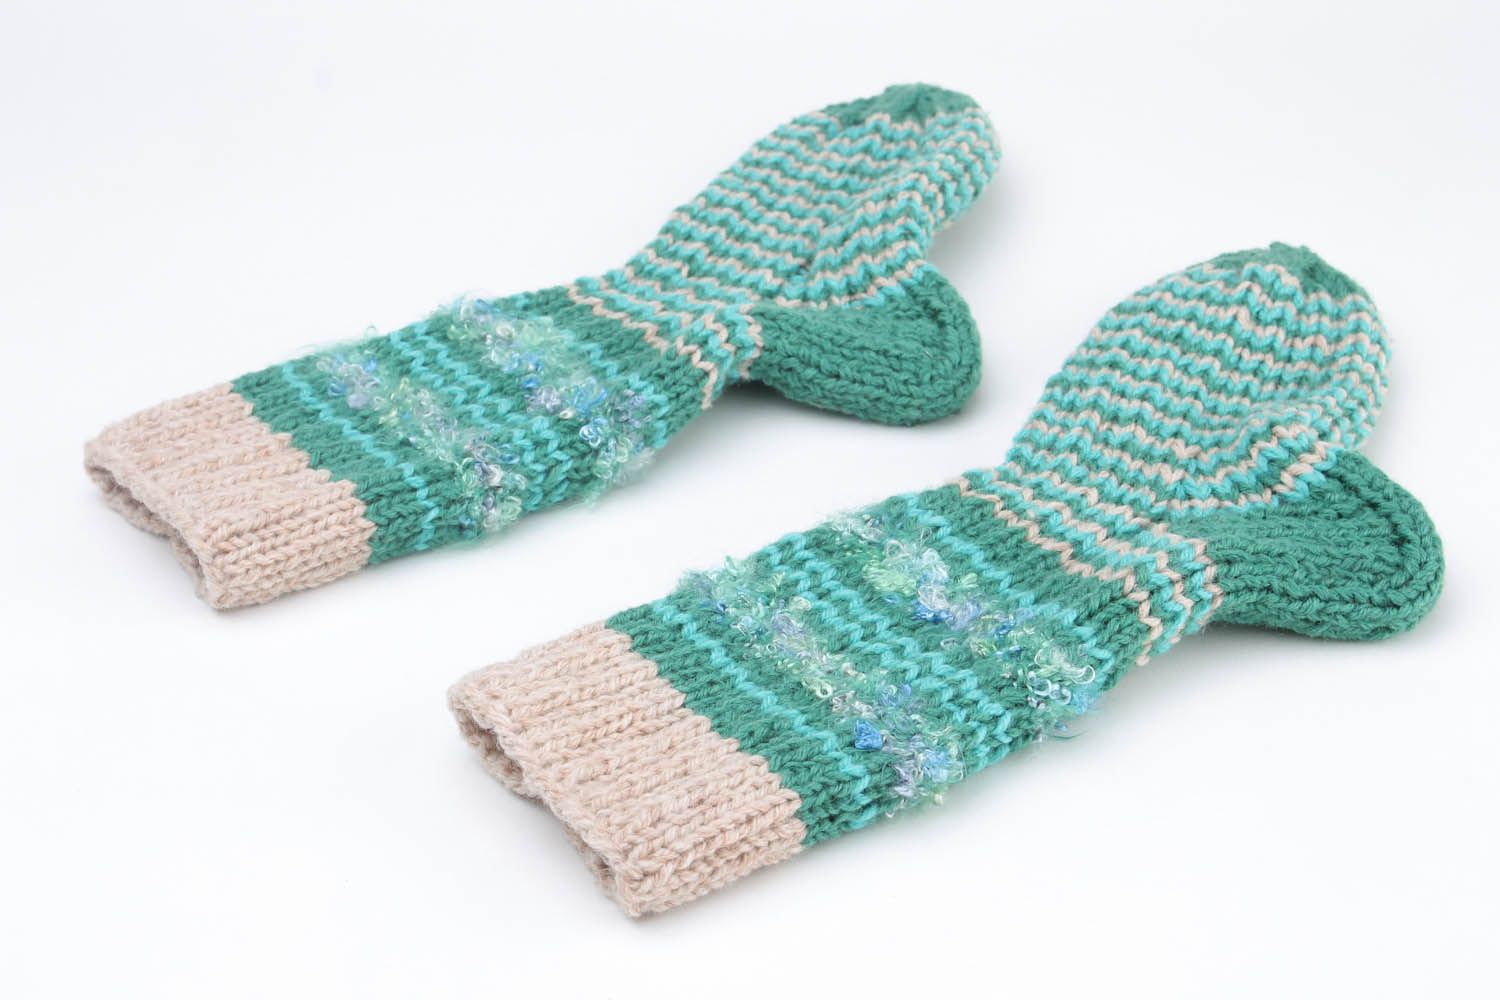 Socks knitted of woolen and semi-woolen threads photo 4